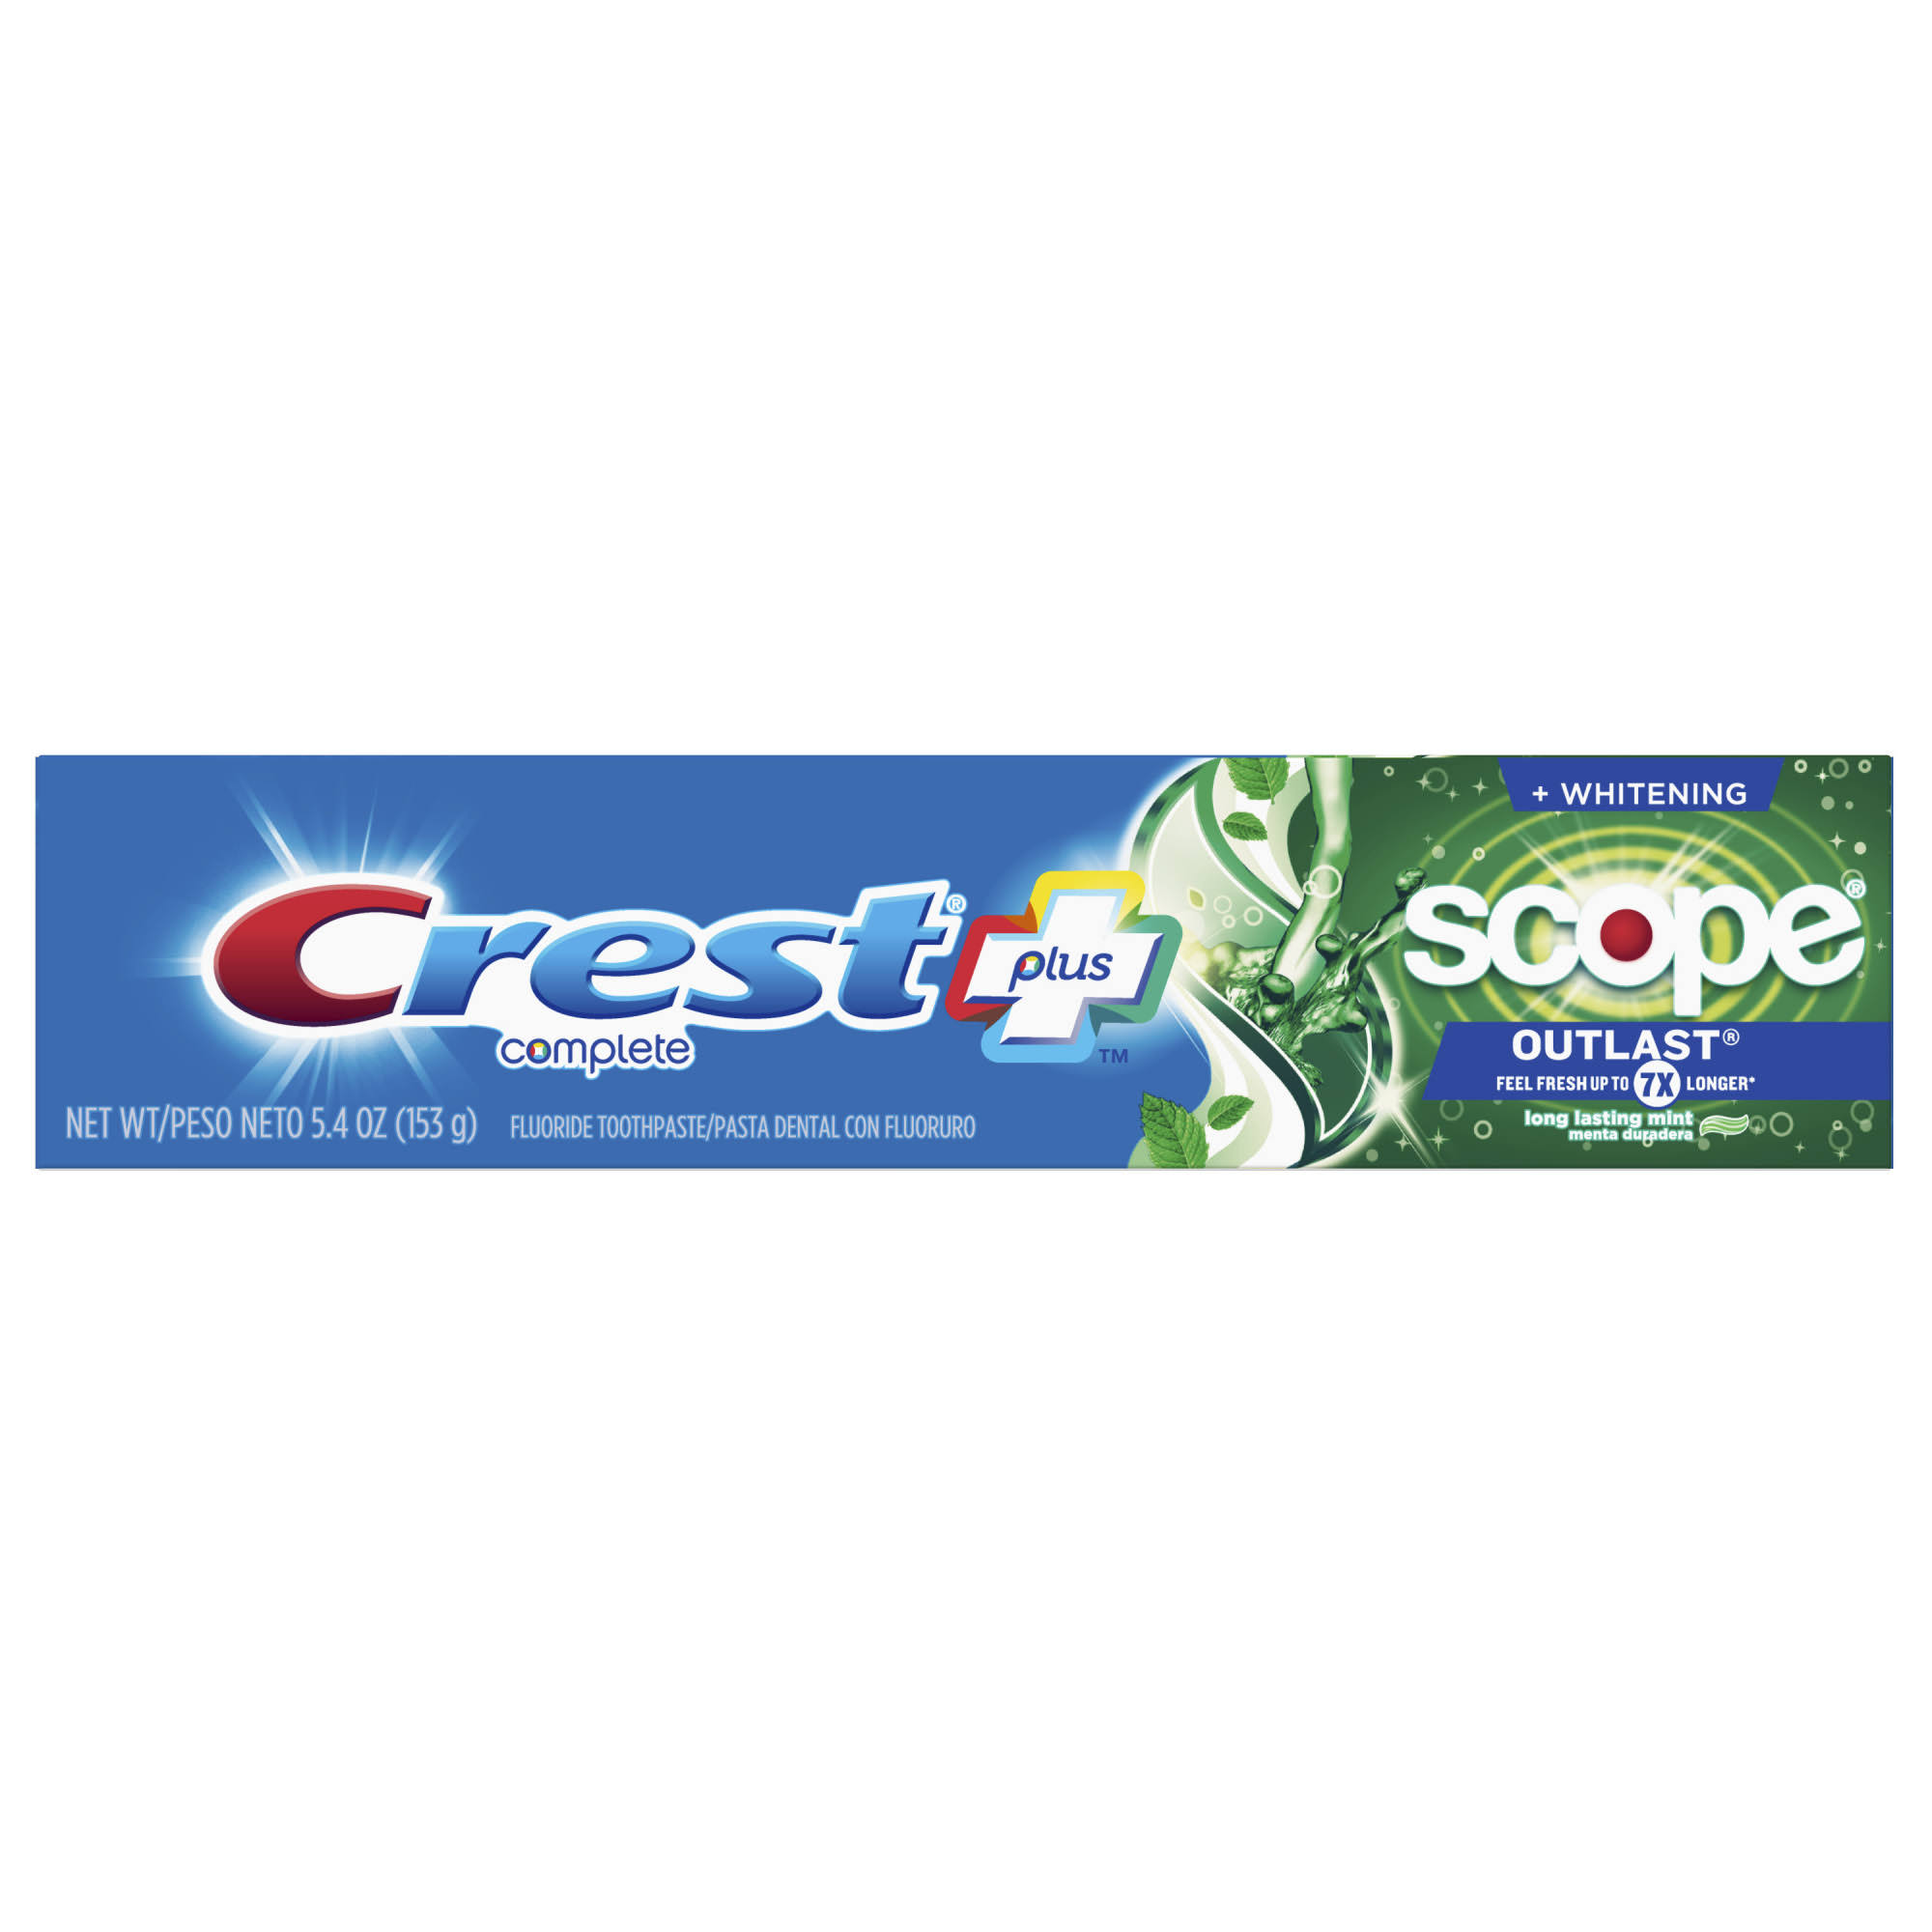 Crest Scope Outlast Complete Whitening Toothpaste - Mint, 5.4oz